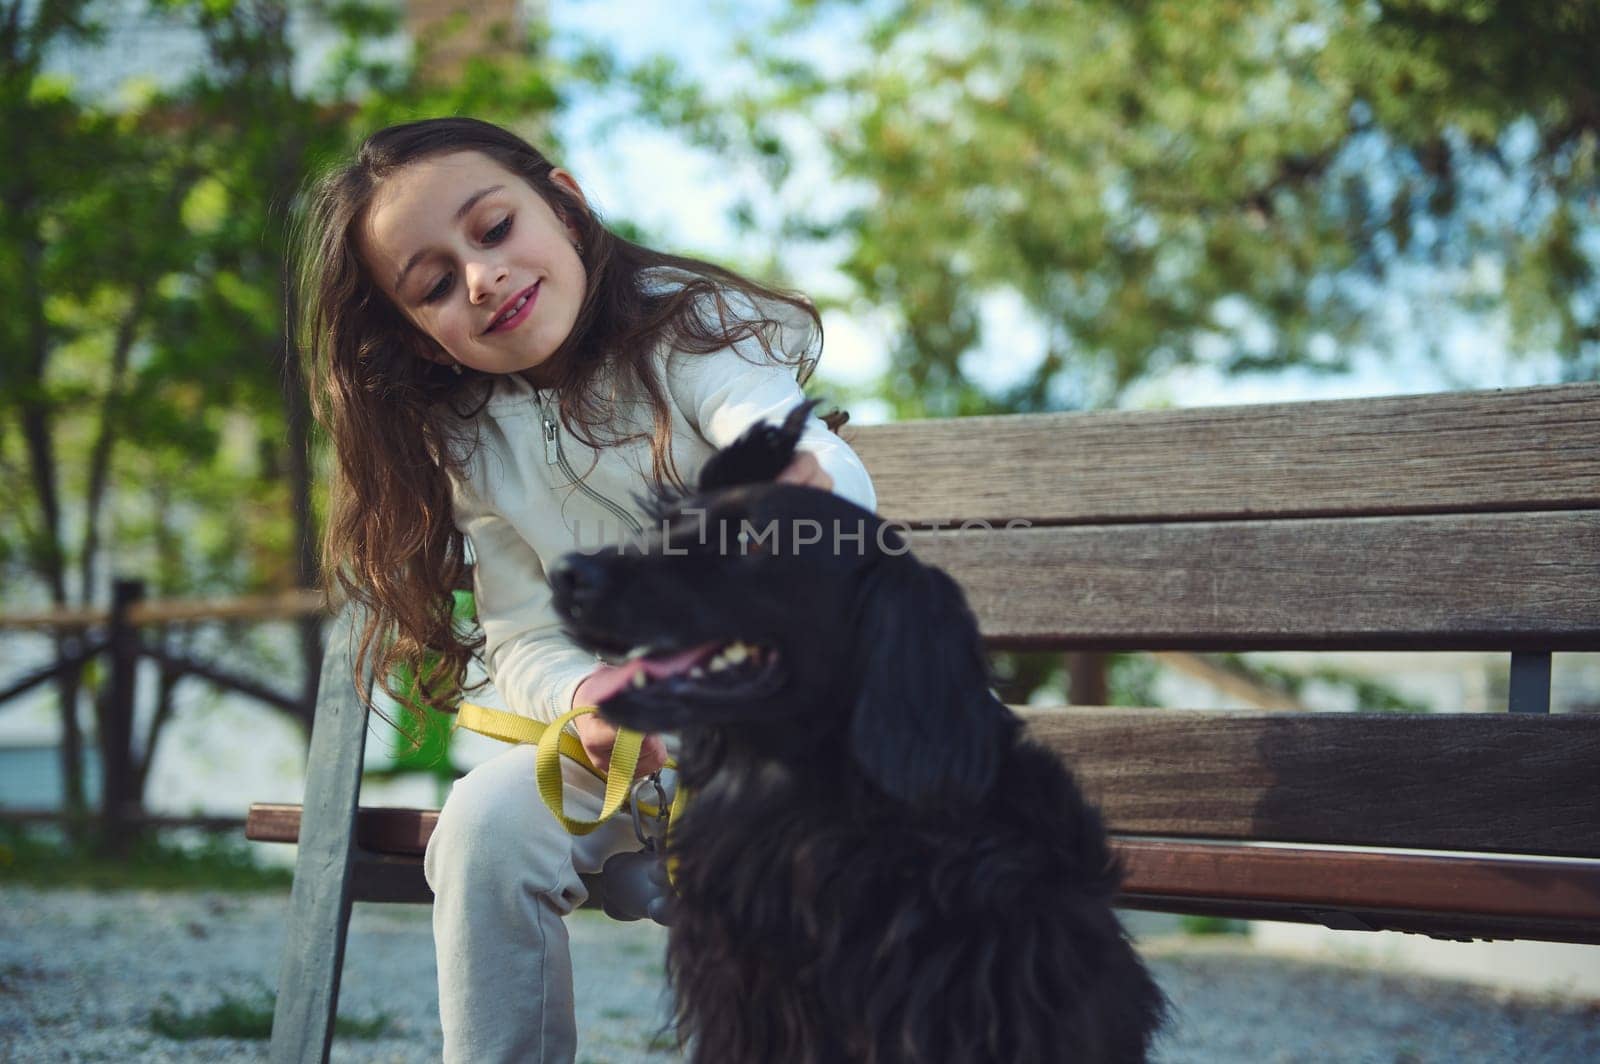 Little girl and her dog during a walk outdoors. People and pets. Lifestyle. The concept of empathy, care and love for animals